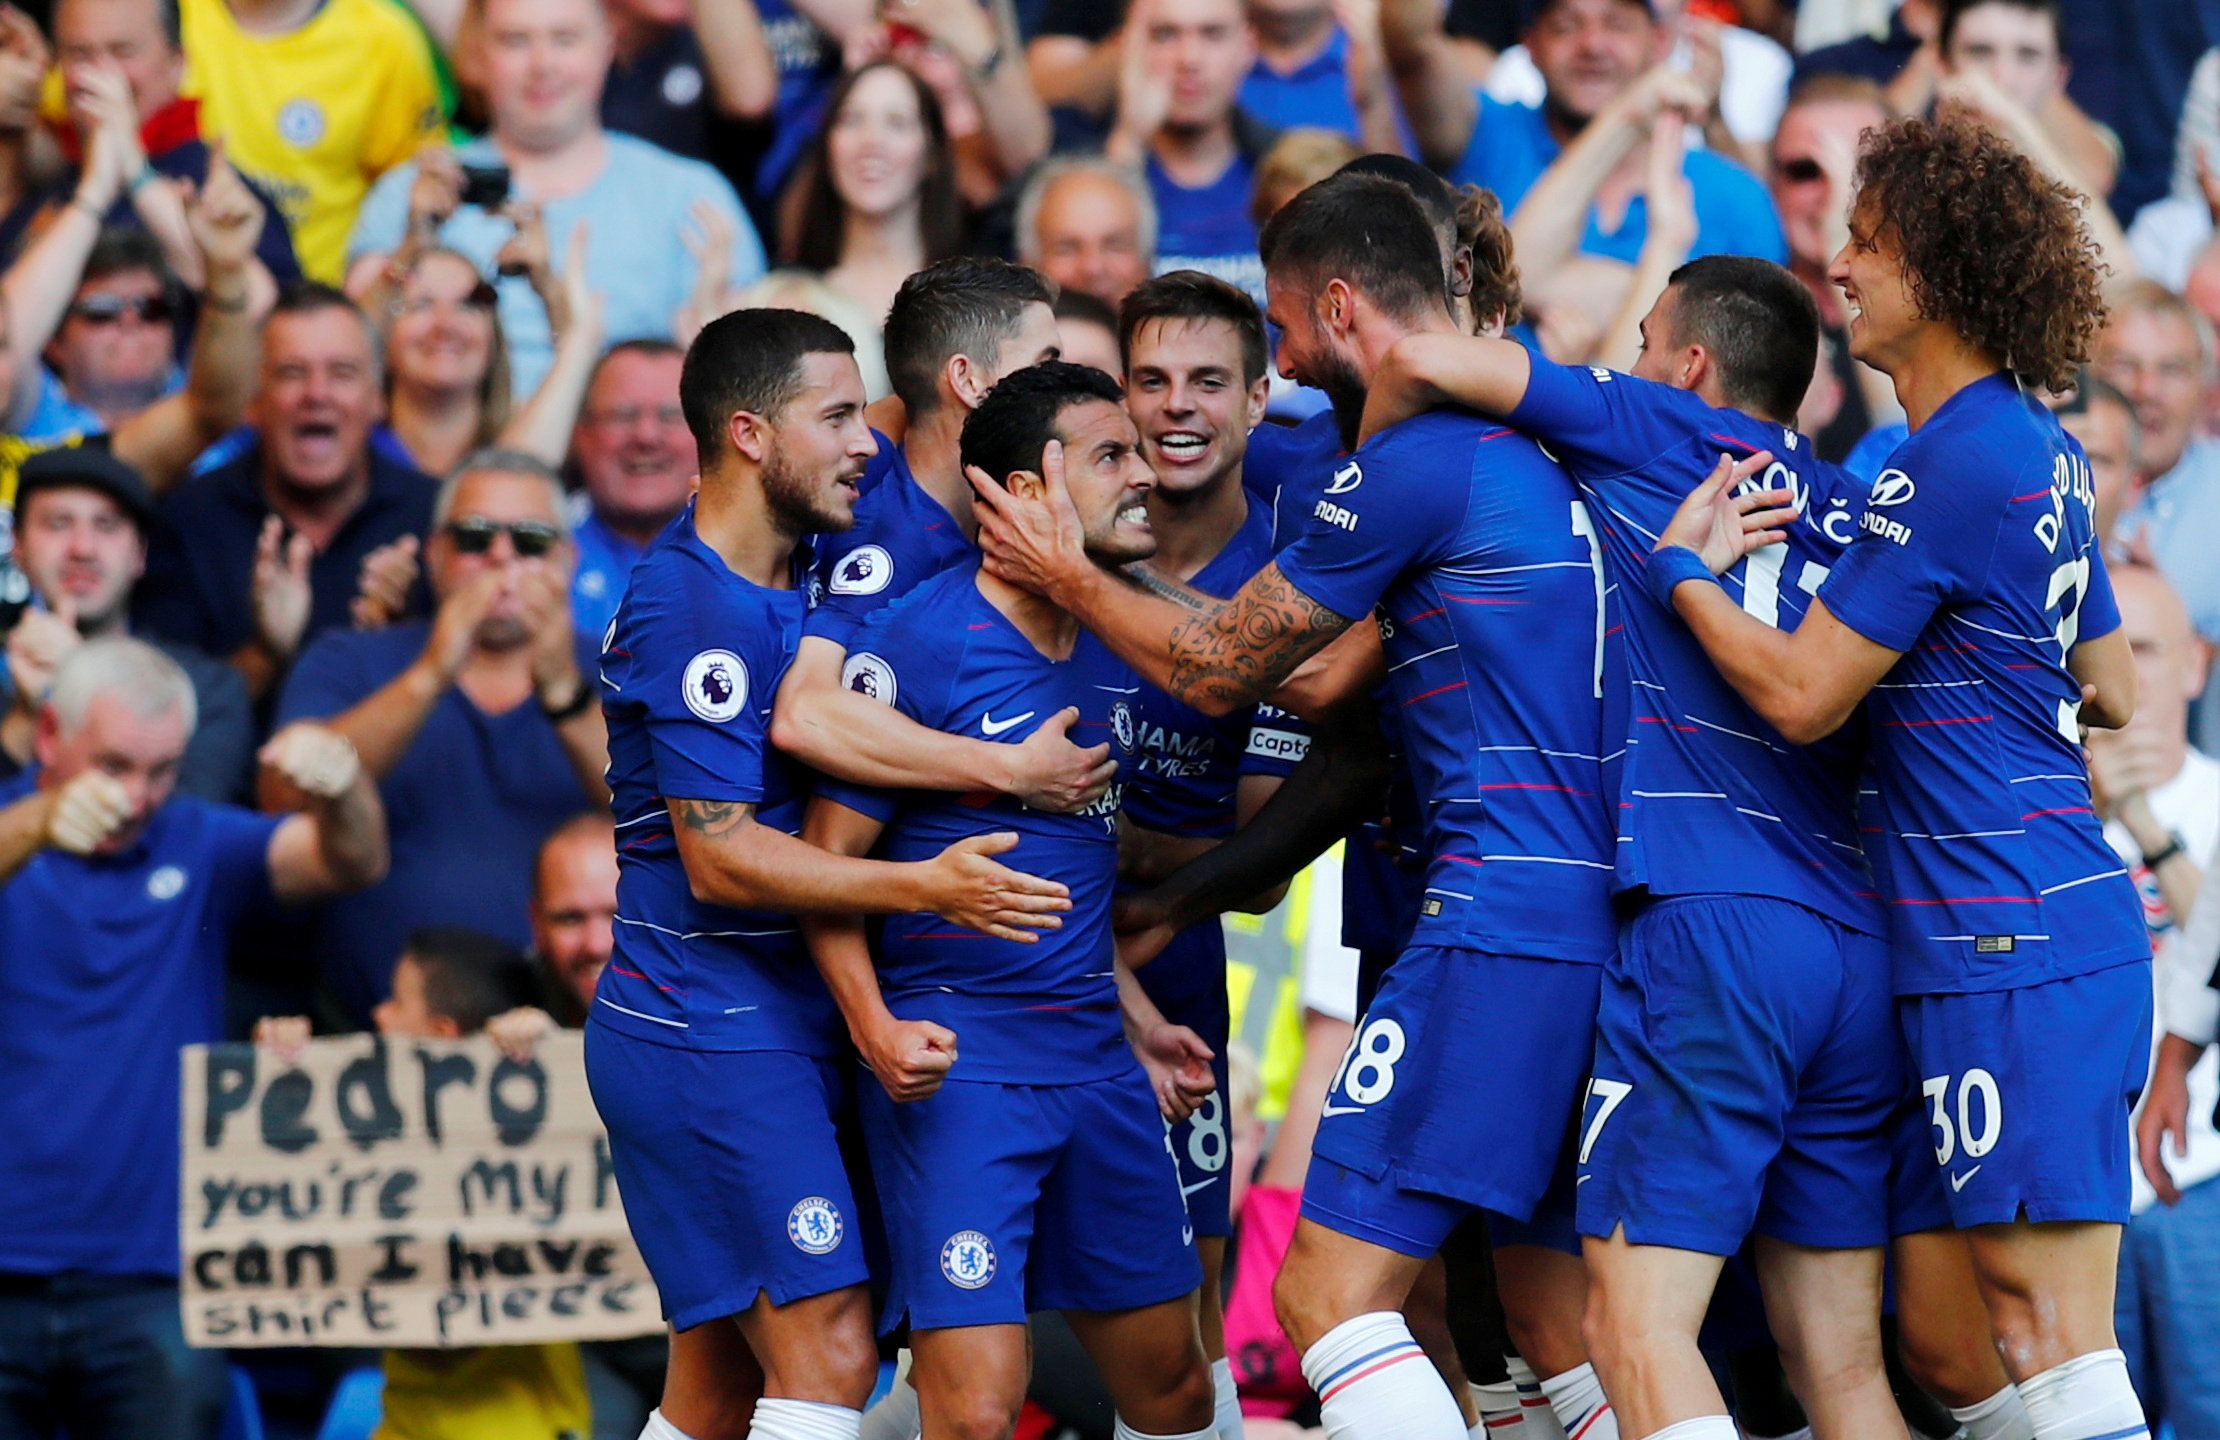 Football: Chelsea keep perfect record with win over Bournemouth